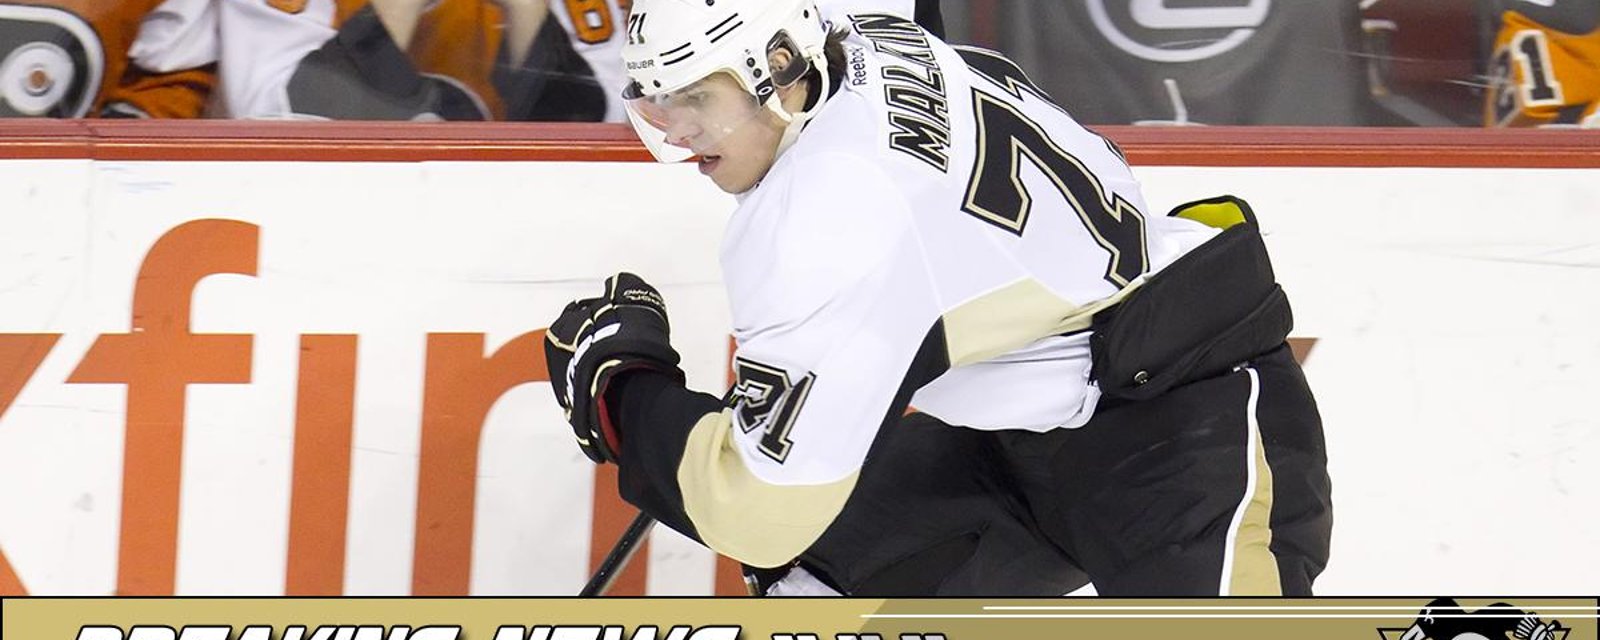 Breaking: Finally some good news about Evgeni Malkin